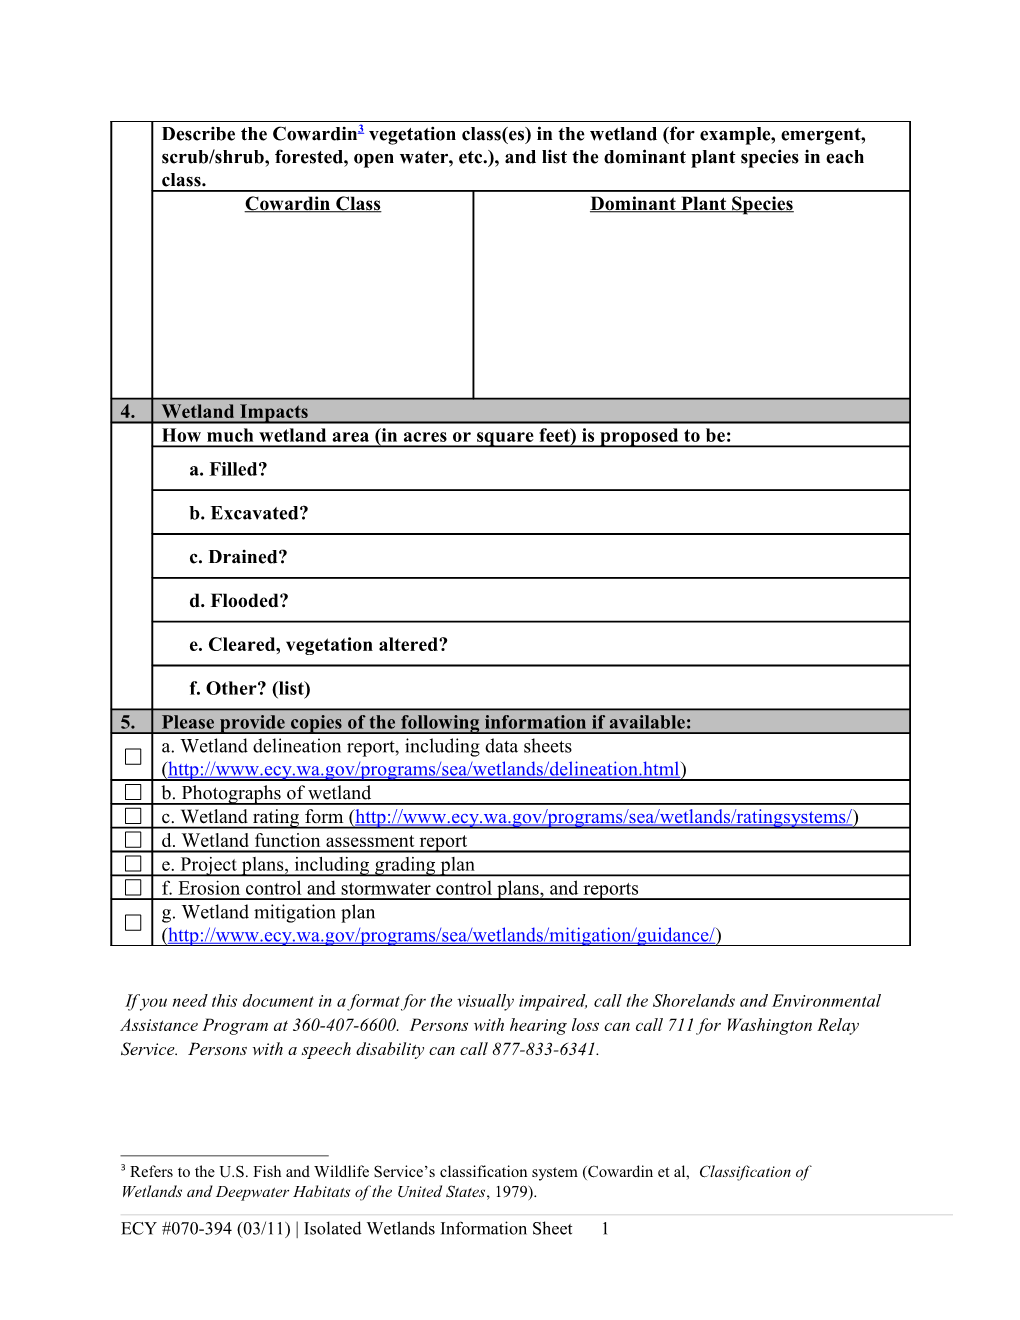 ECY #070-394 (03/11) Isolated Wetlands Information Sheet1